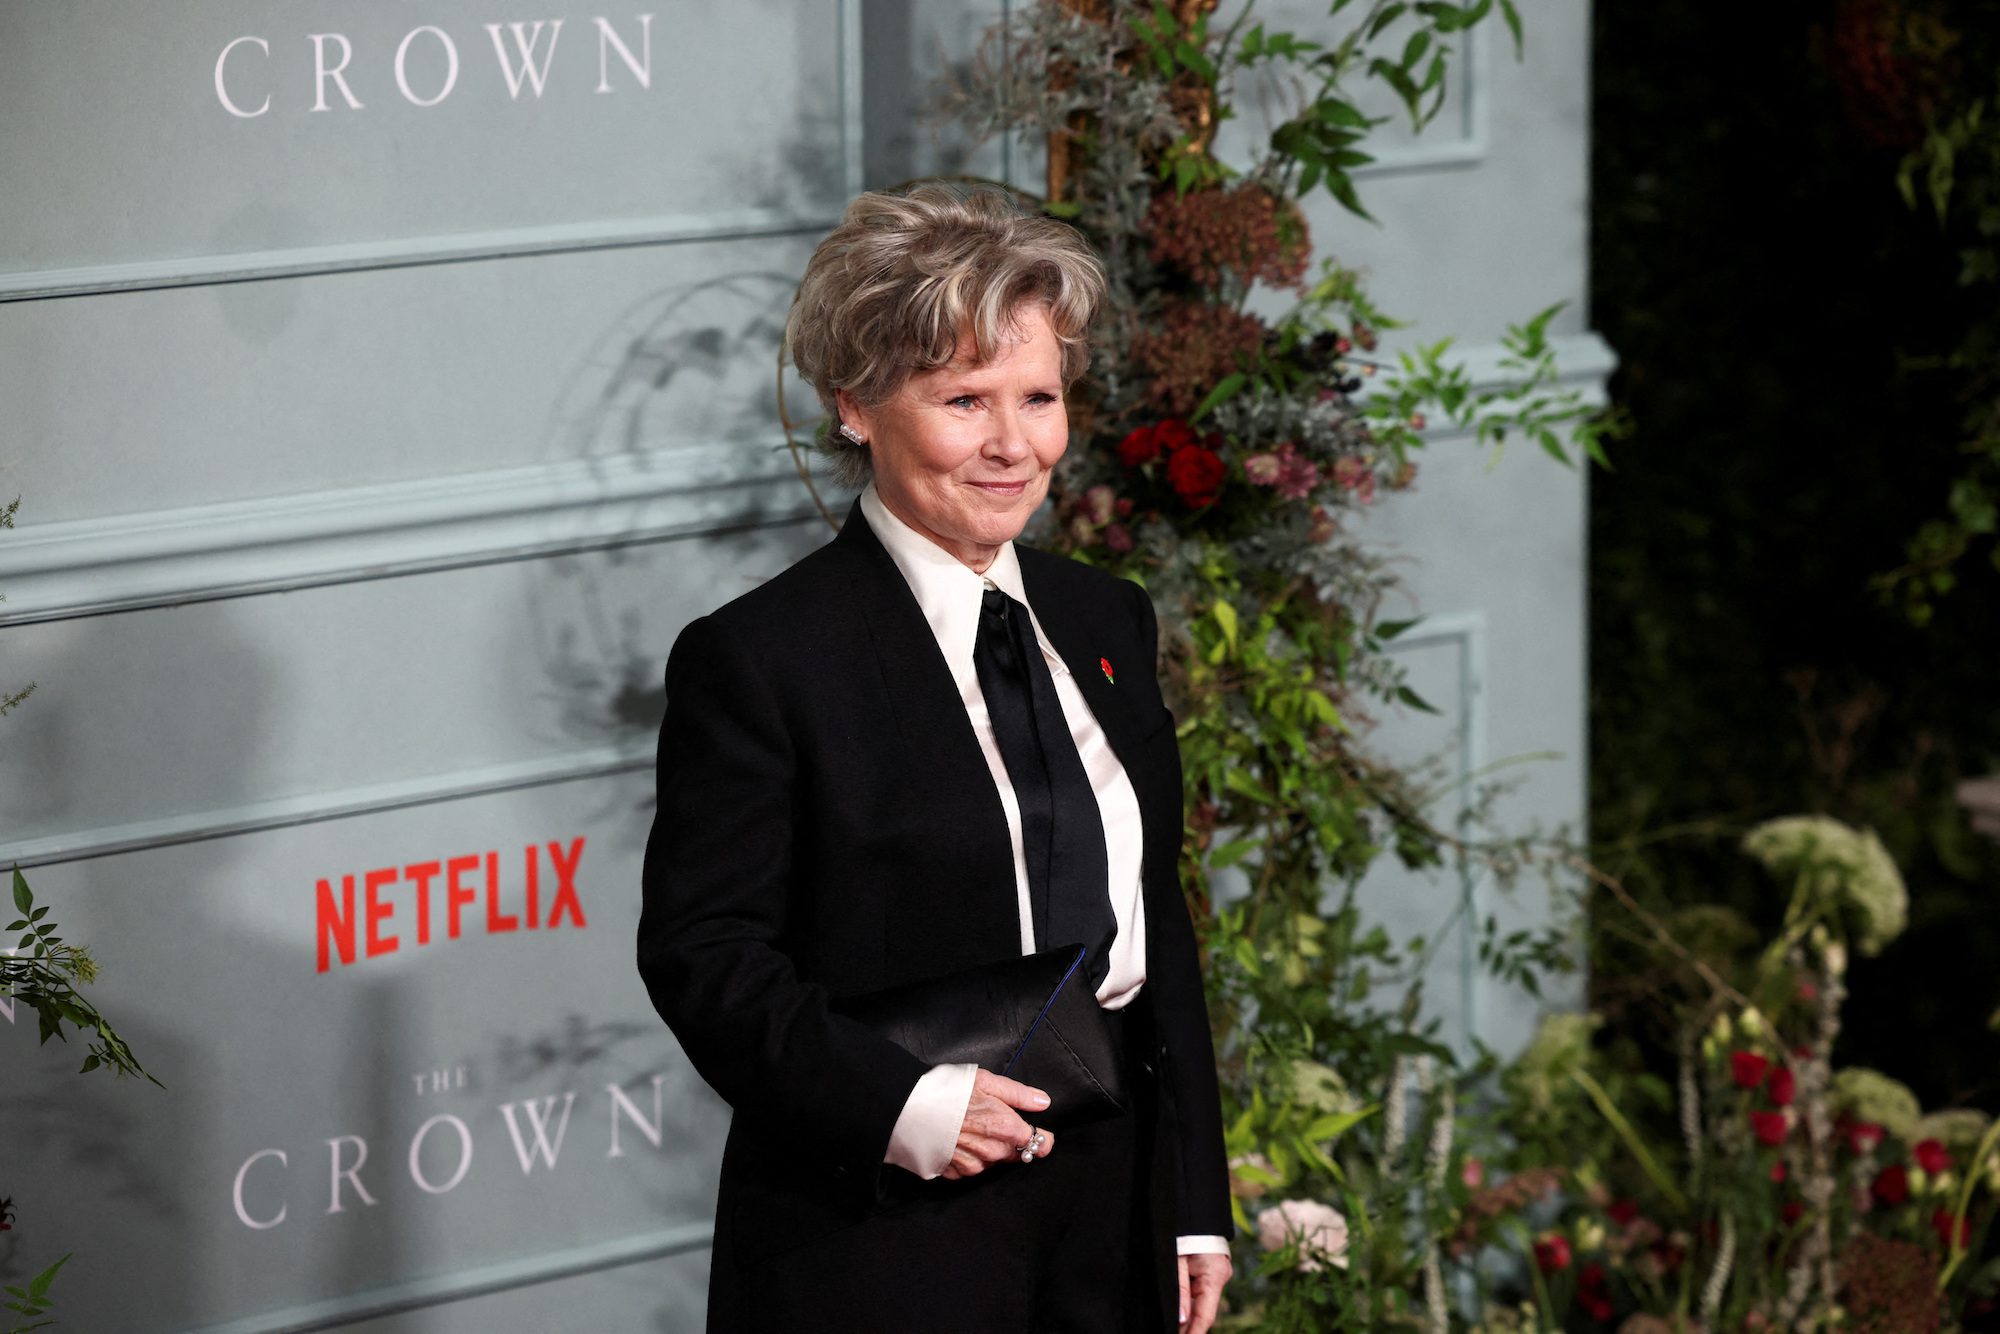 Cast member Imelda Staunton attends the premiere for the TV series The Crown Season 5 in London, Britain, November 8, 2022. REUTERS/Henry Nicholls/File Photo